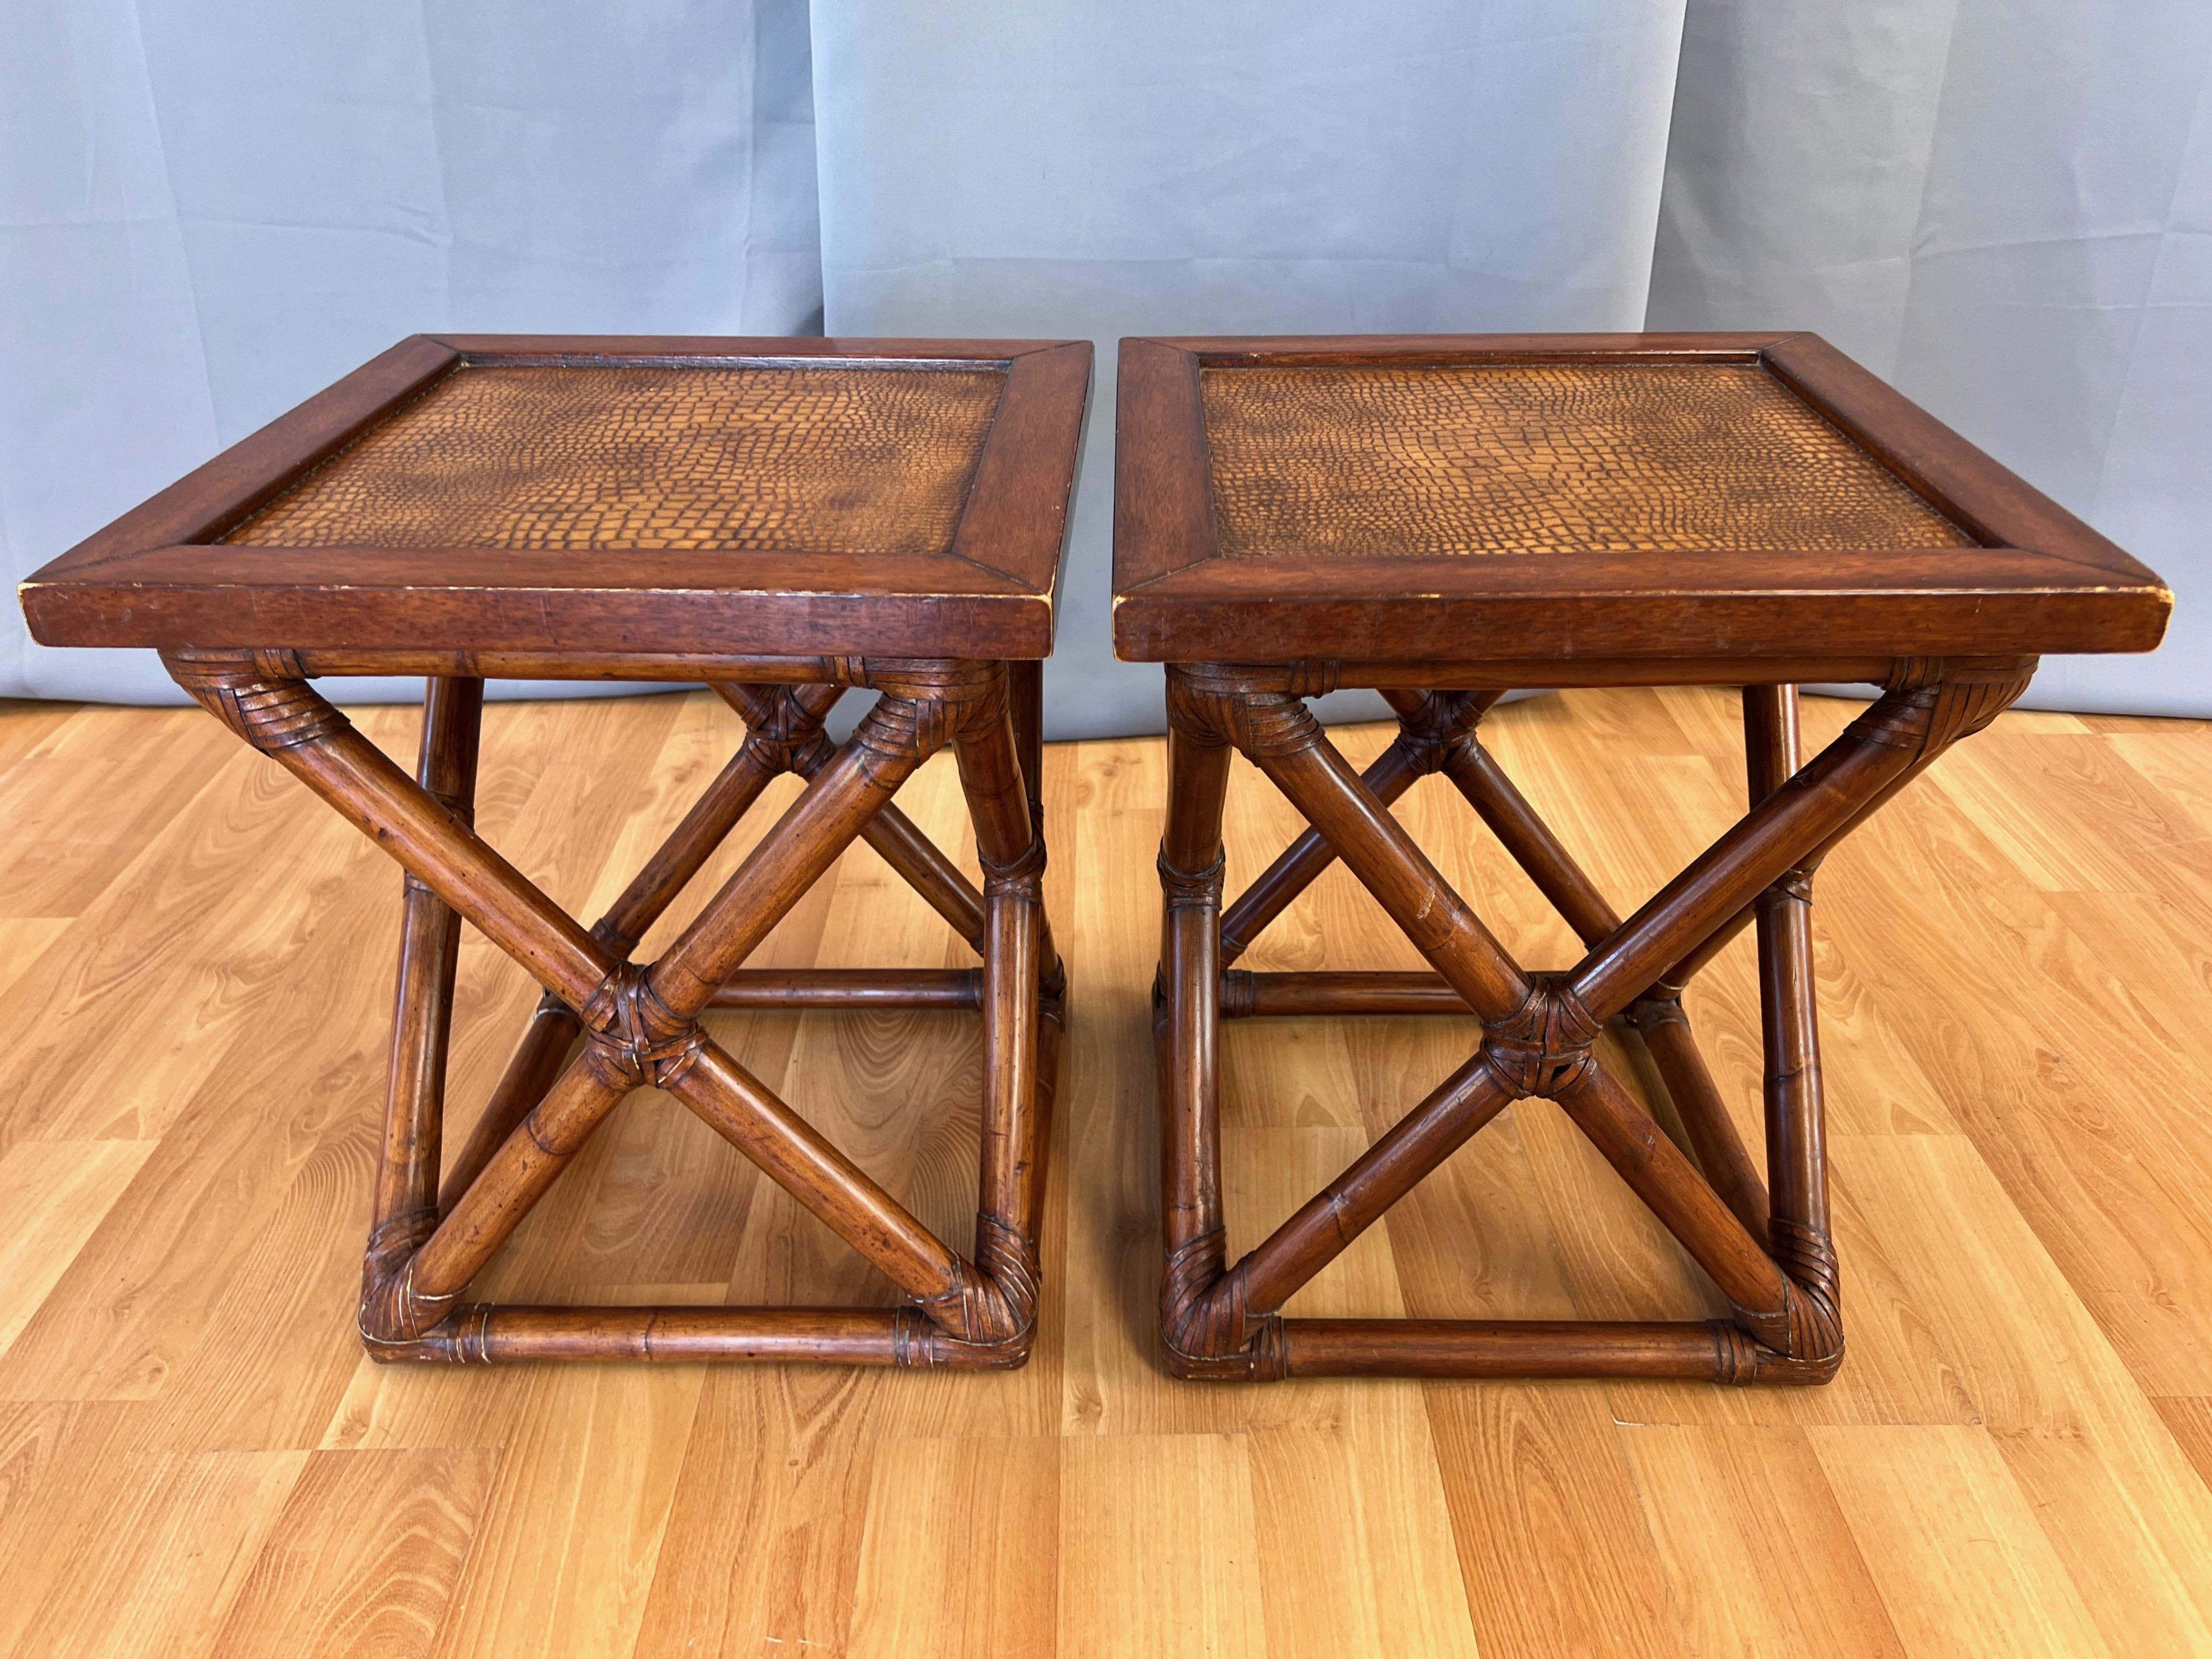 Pair of Palecek Rattan End Tables with Faux Crocodile Leather Tops, c. 2010 For Sale 6